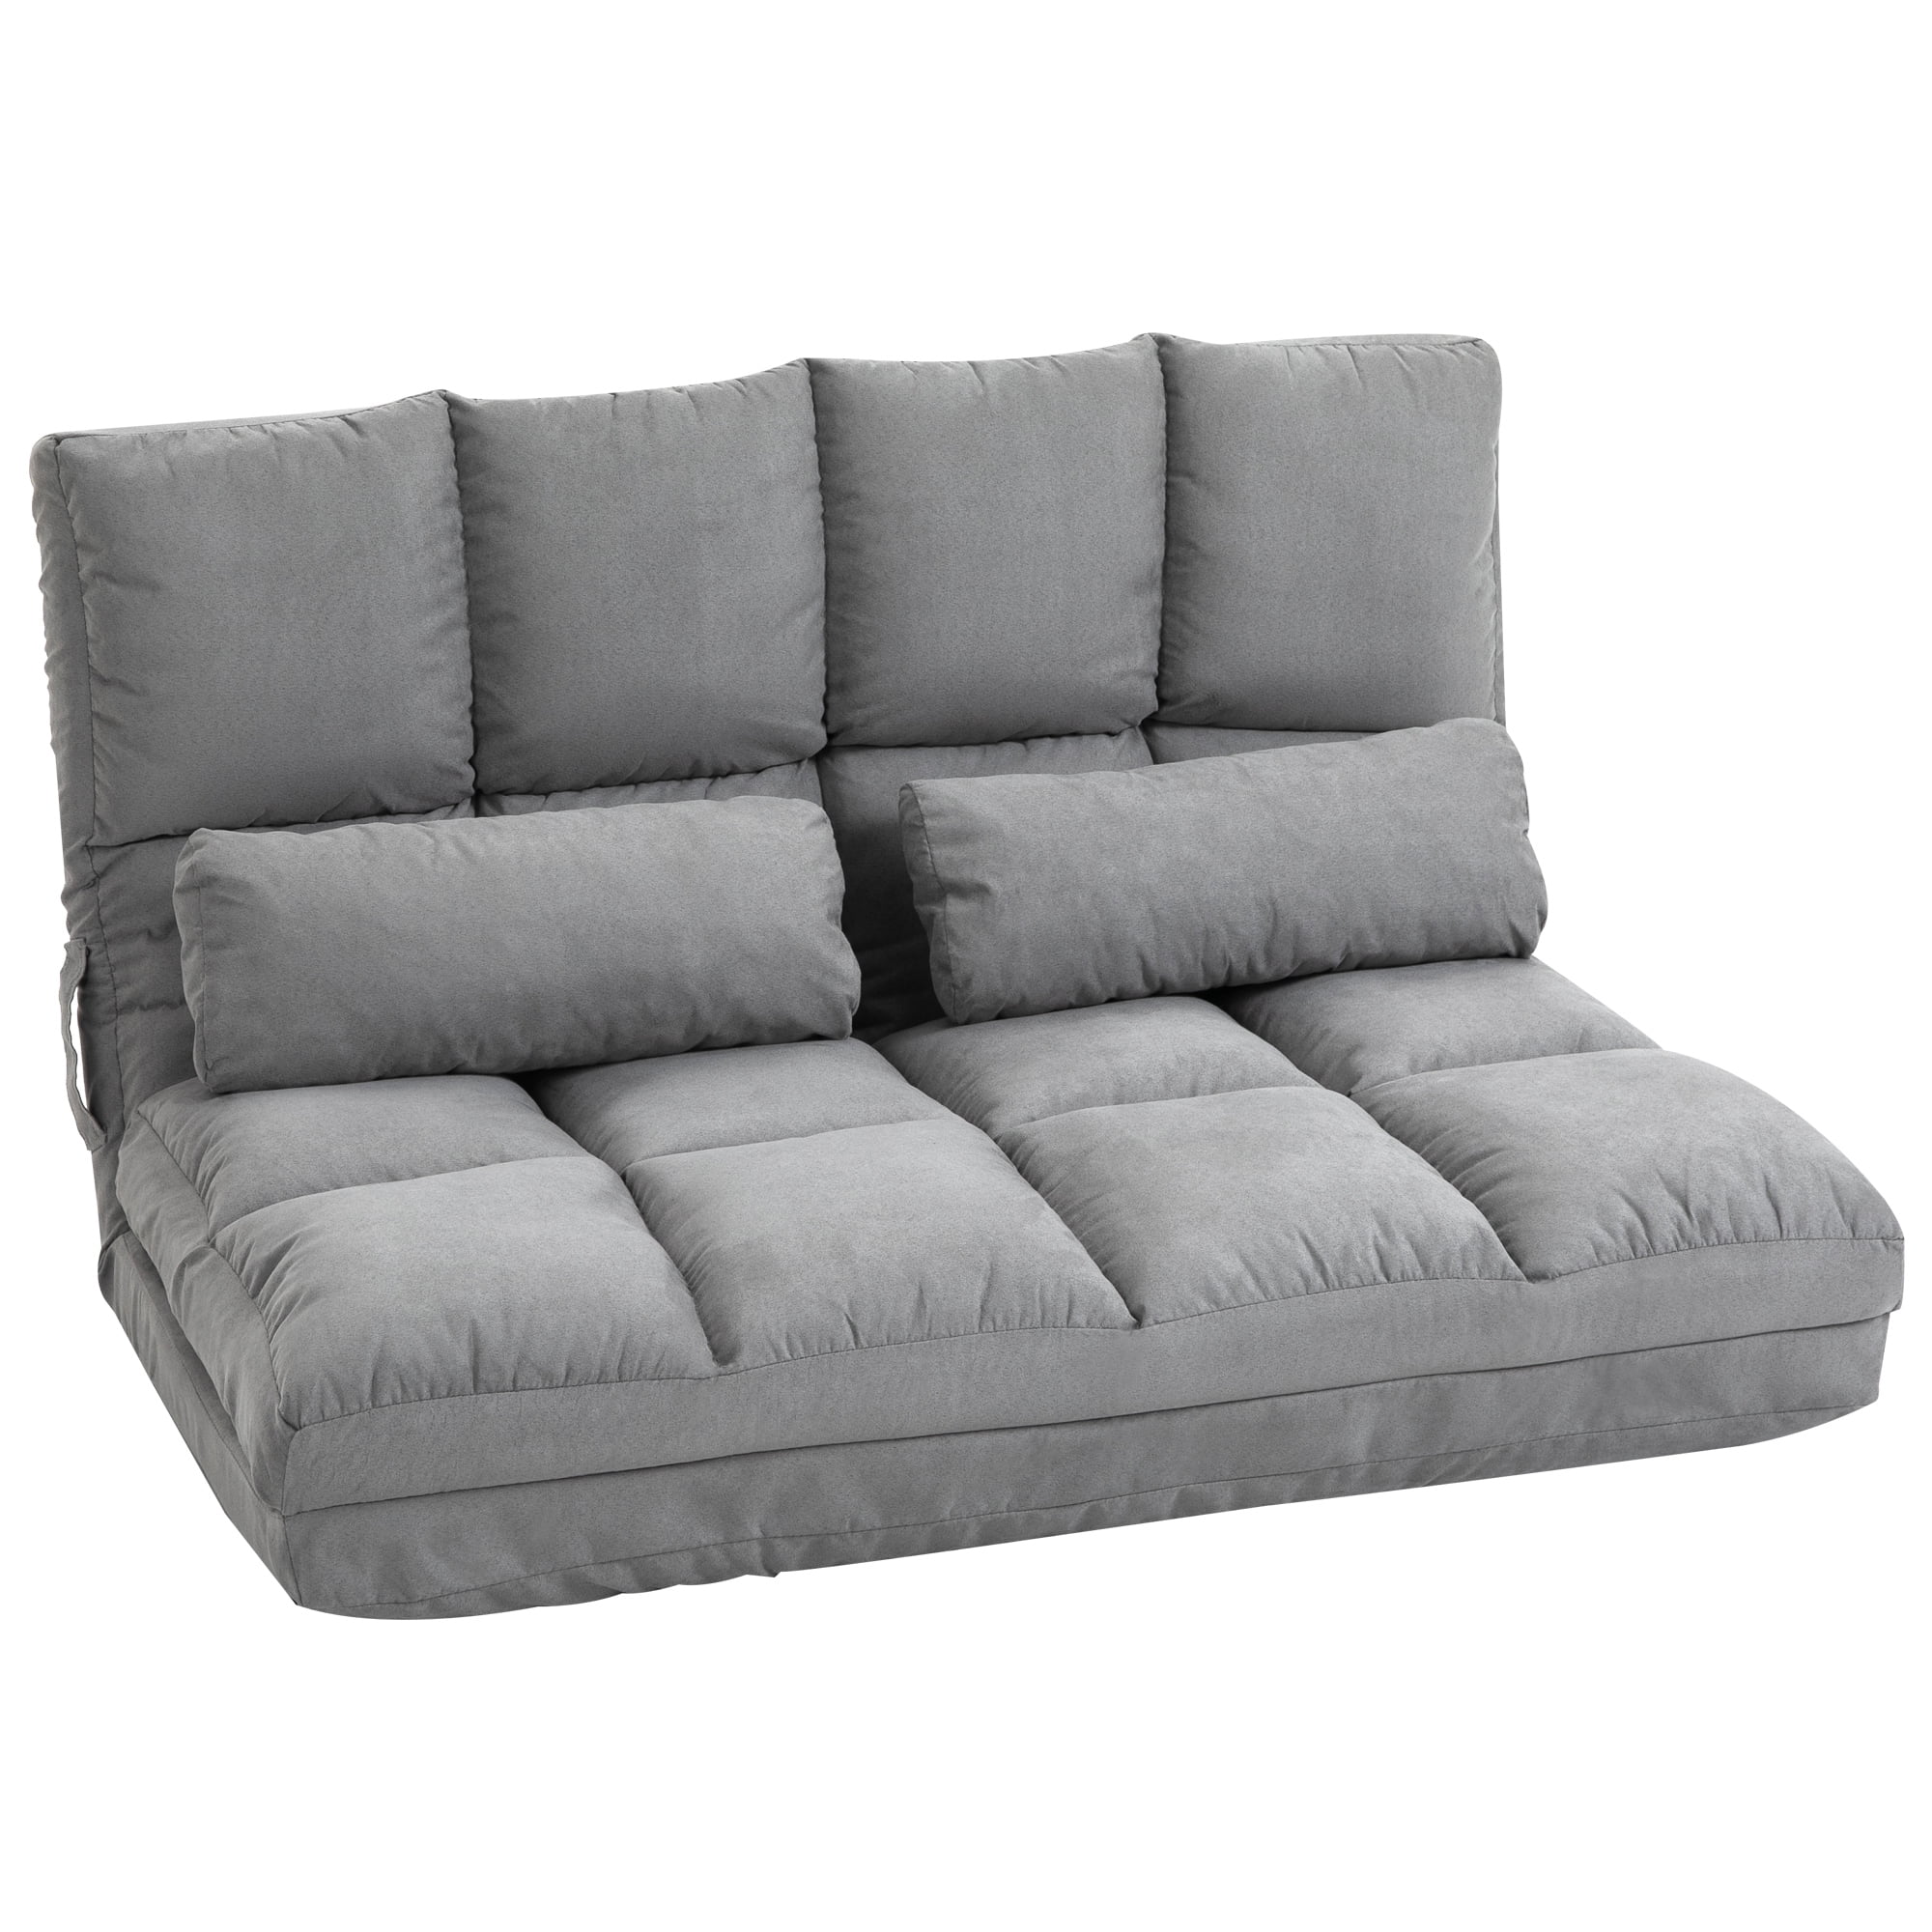 Upgraded] Heavy Duty Couch Cushion Support for Sagging Seat 20.5